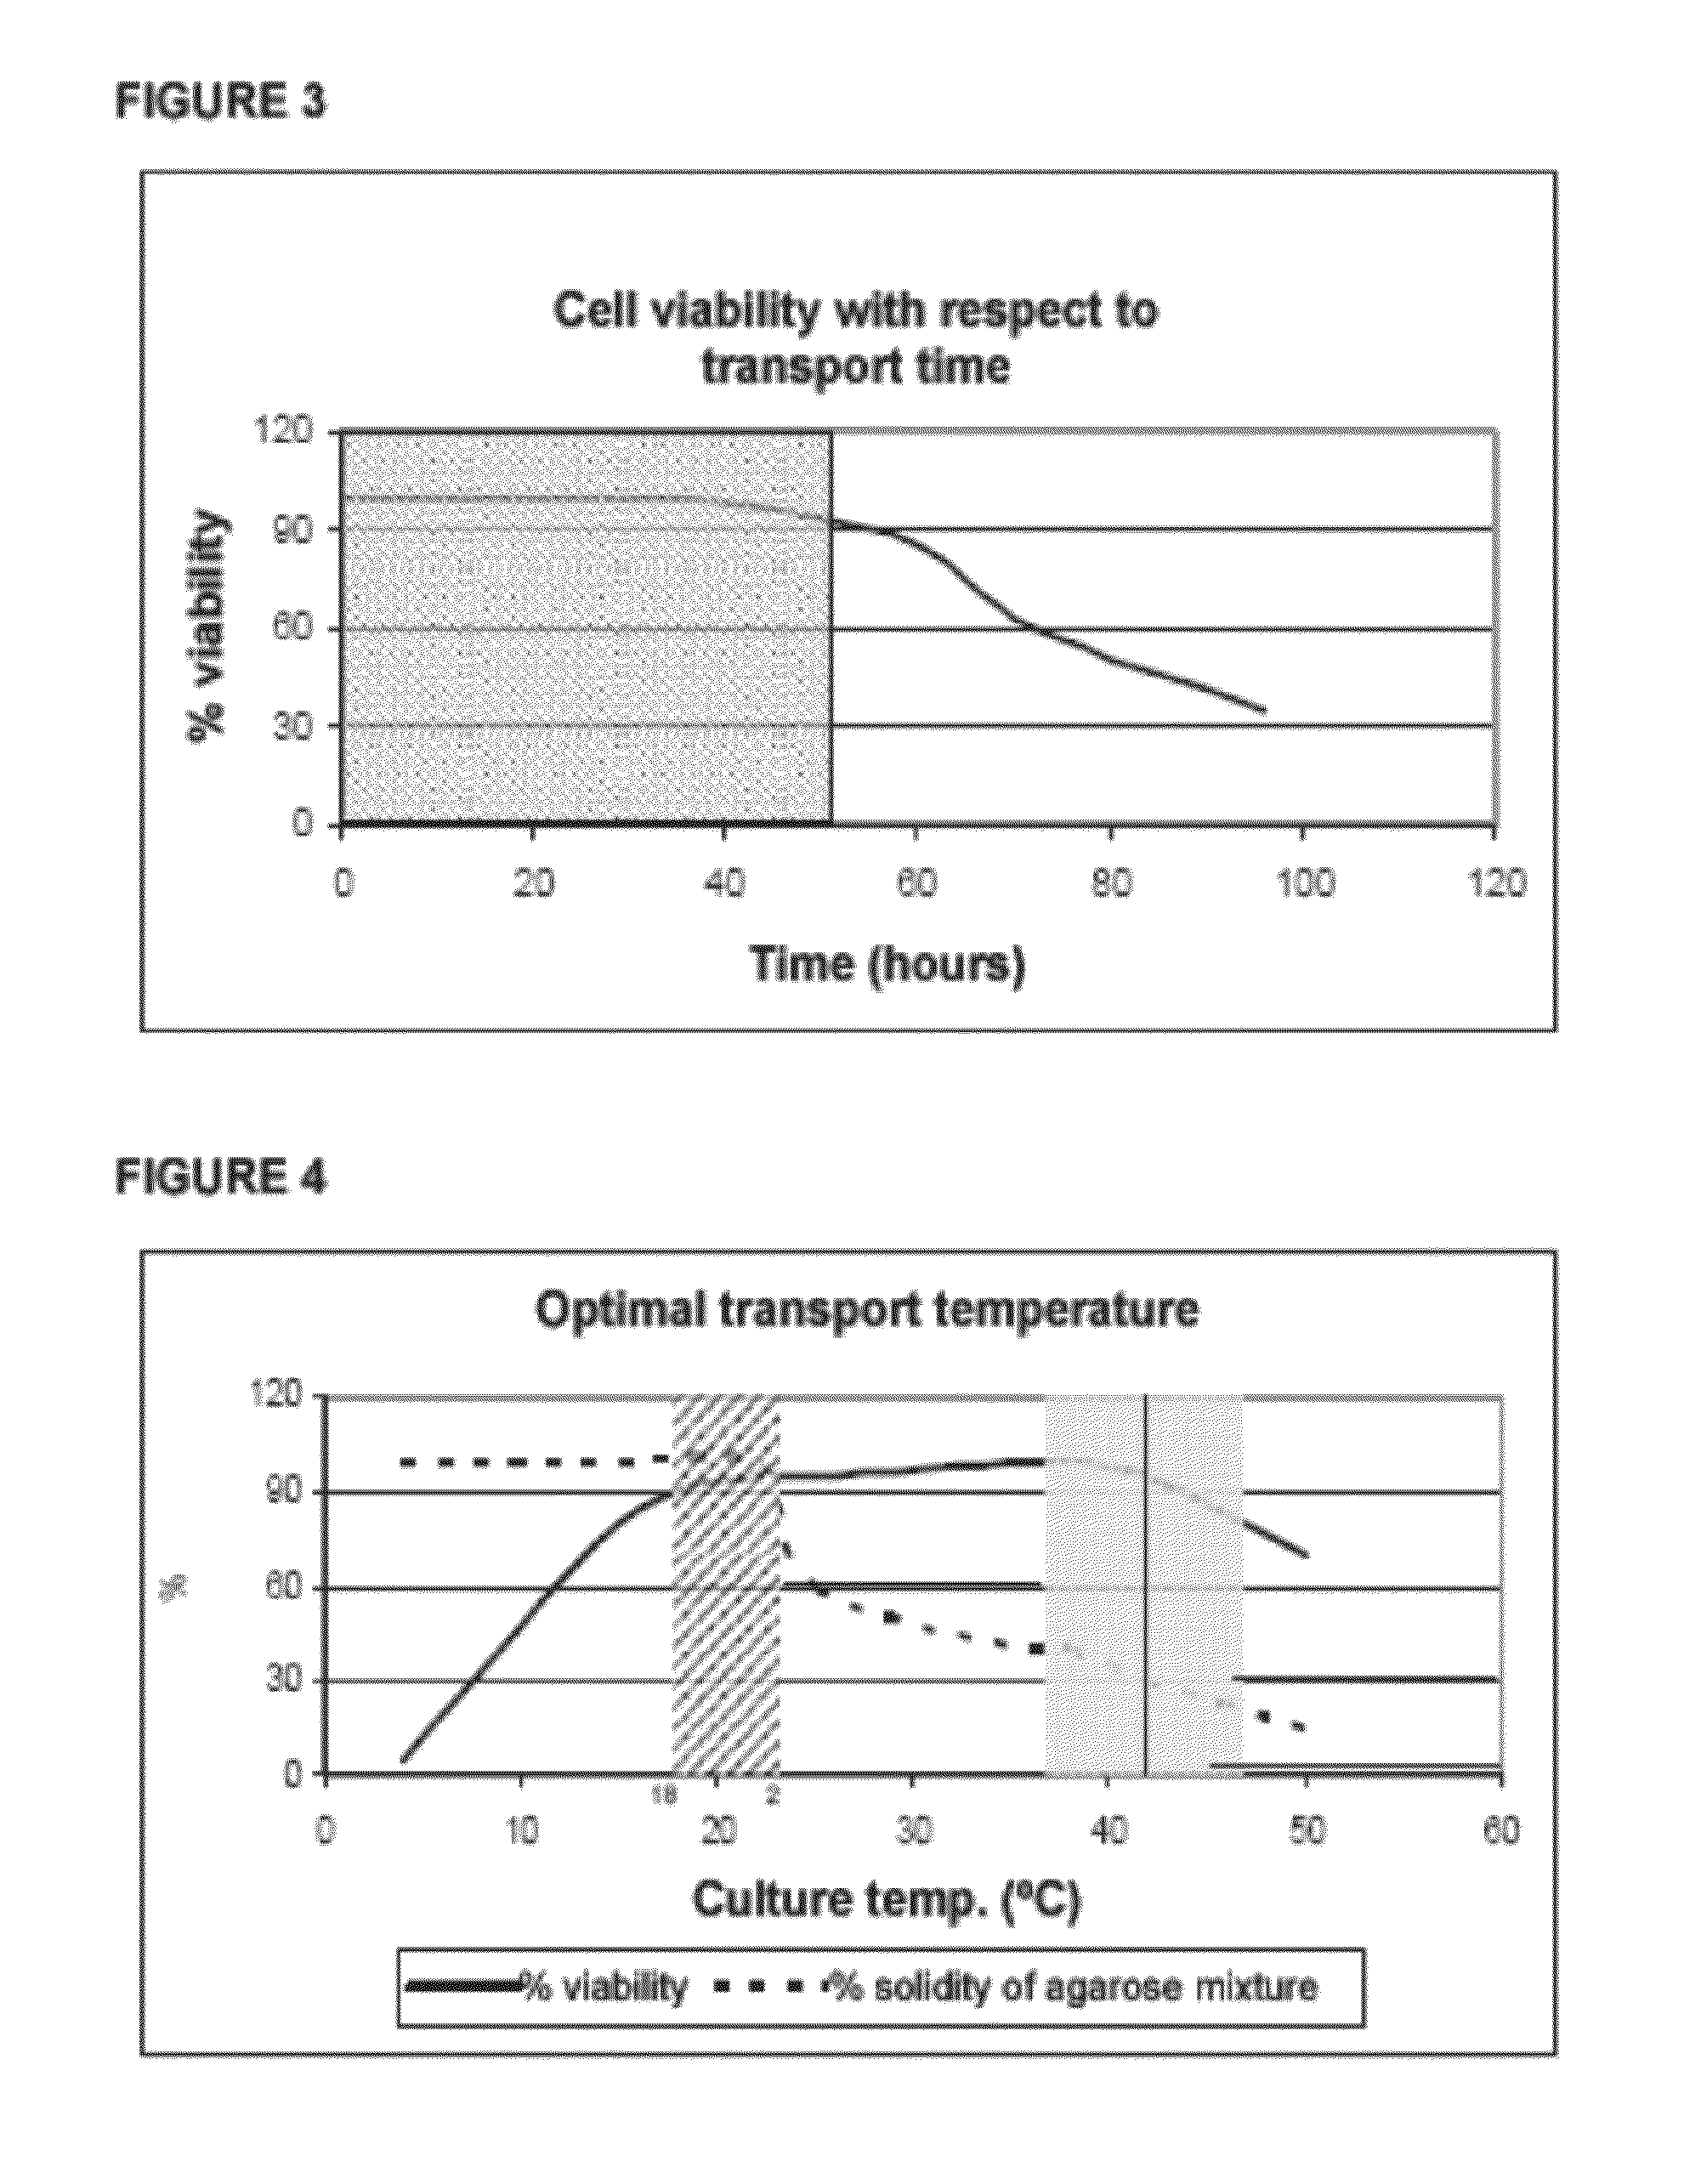 Cell transport system comprising a homogeneous mixture of agarose and agarase